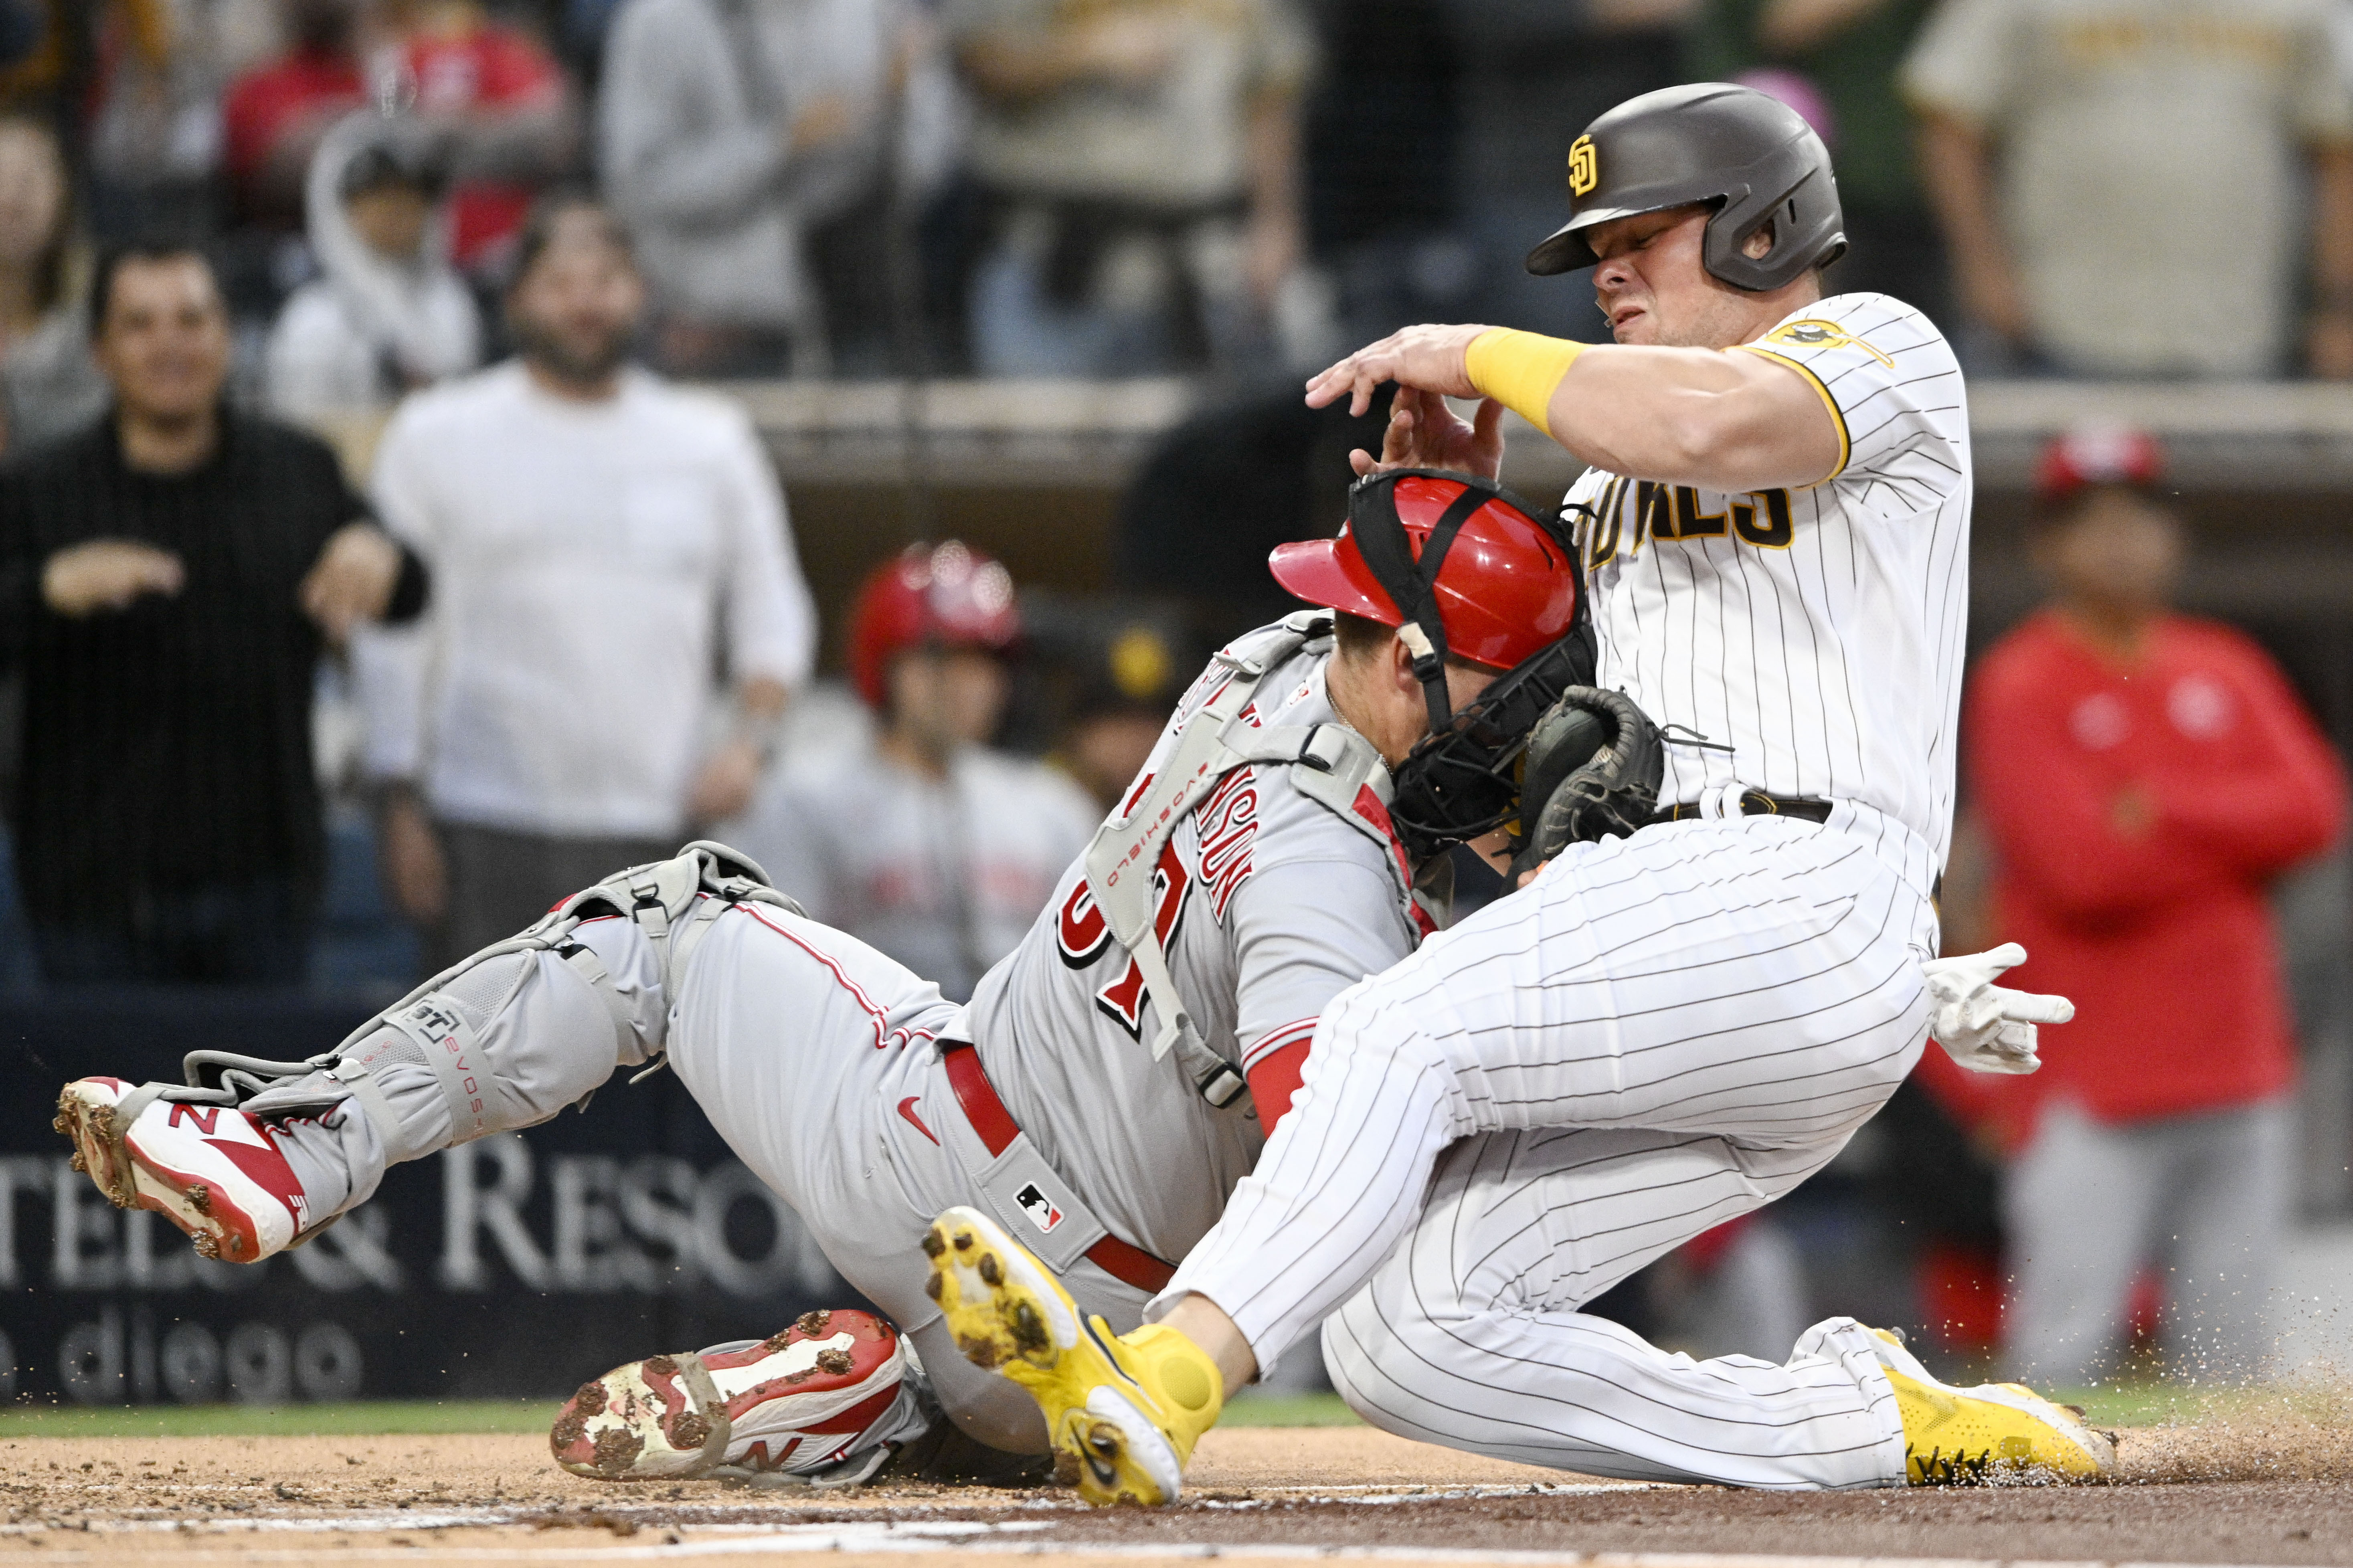 What should the Padres expect from Luke Voit?